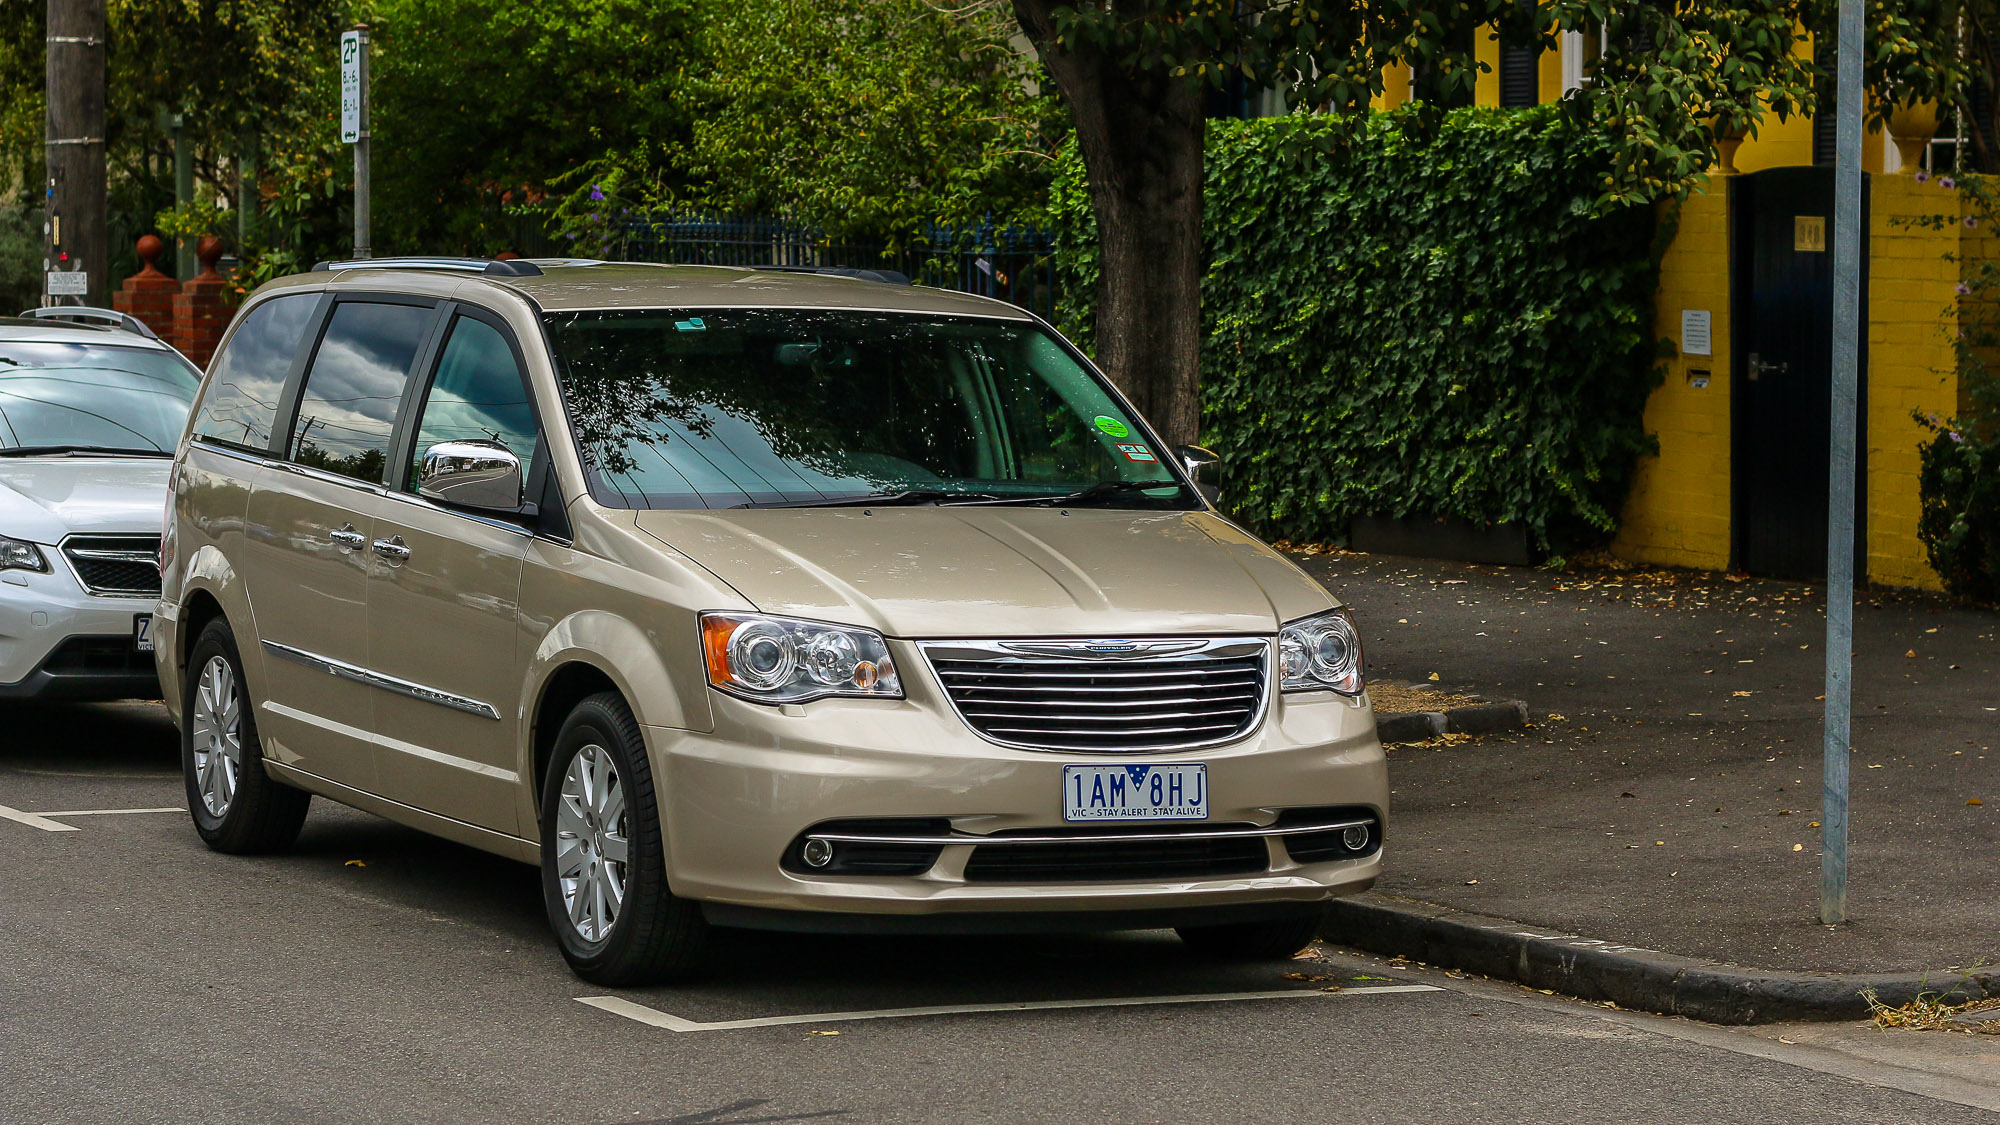 Chrysler grand voyager video review #3